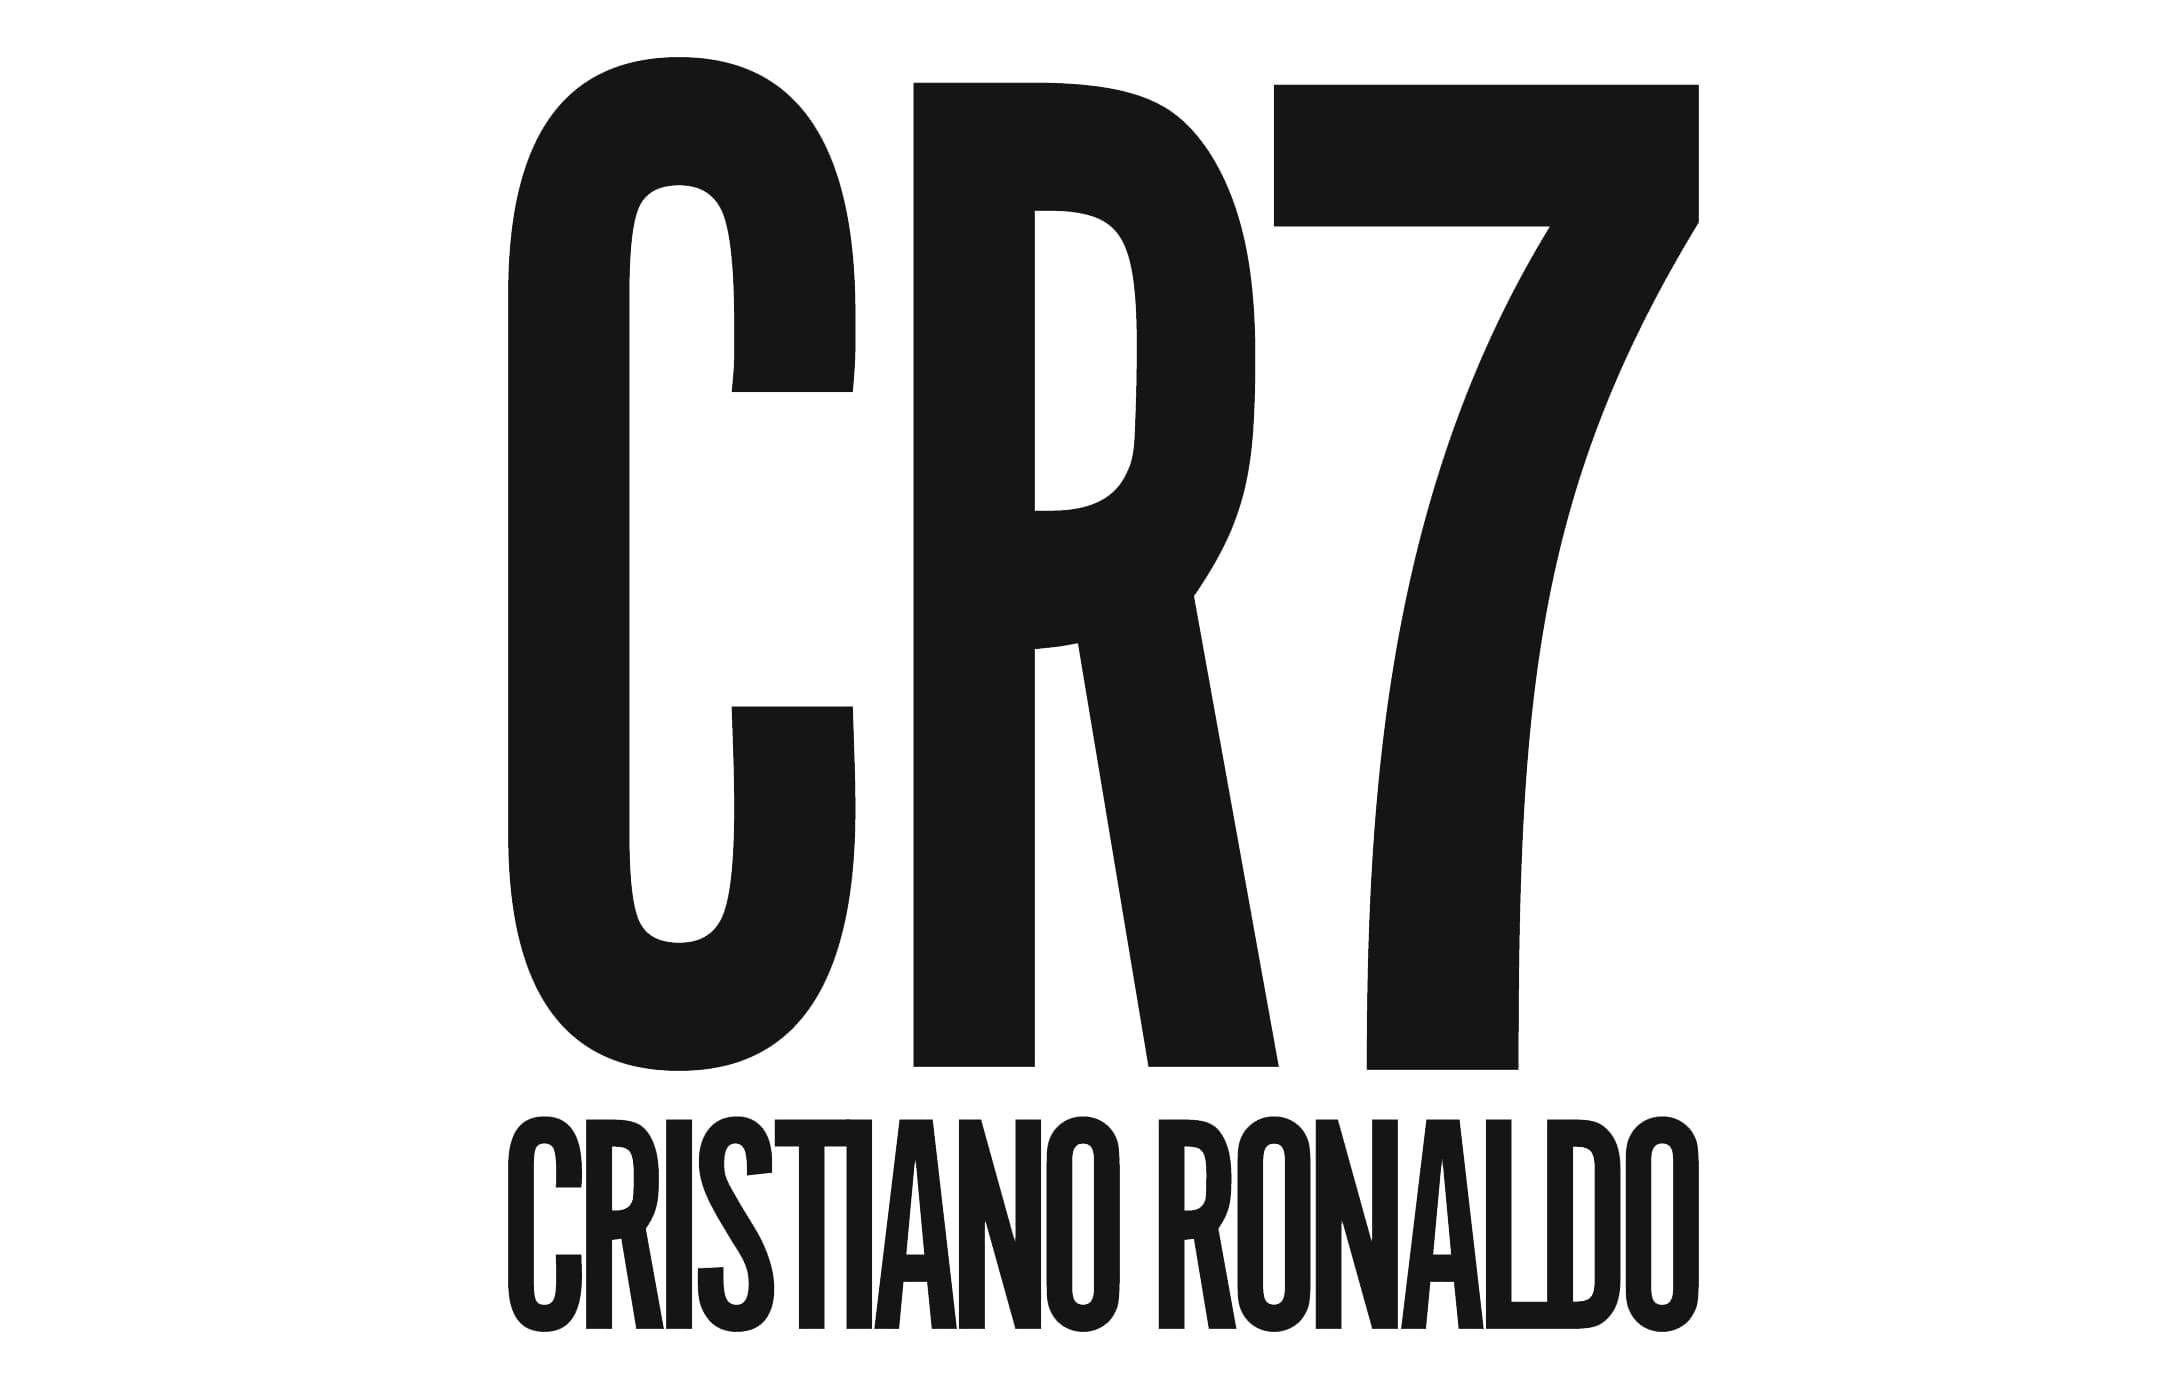 16 Cristiano Ronaldo Black White Drawing Royalty-Free Photos and Stock  Images | Shutterstock